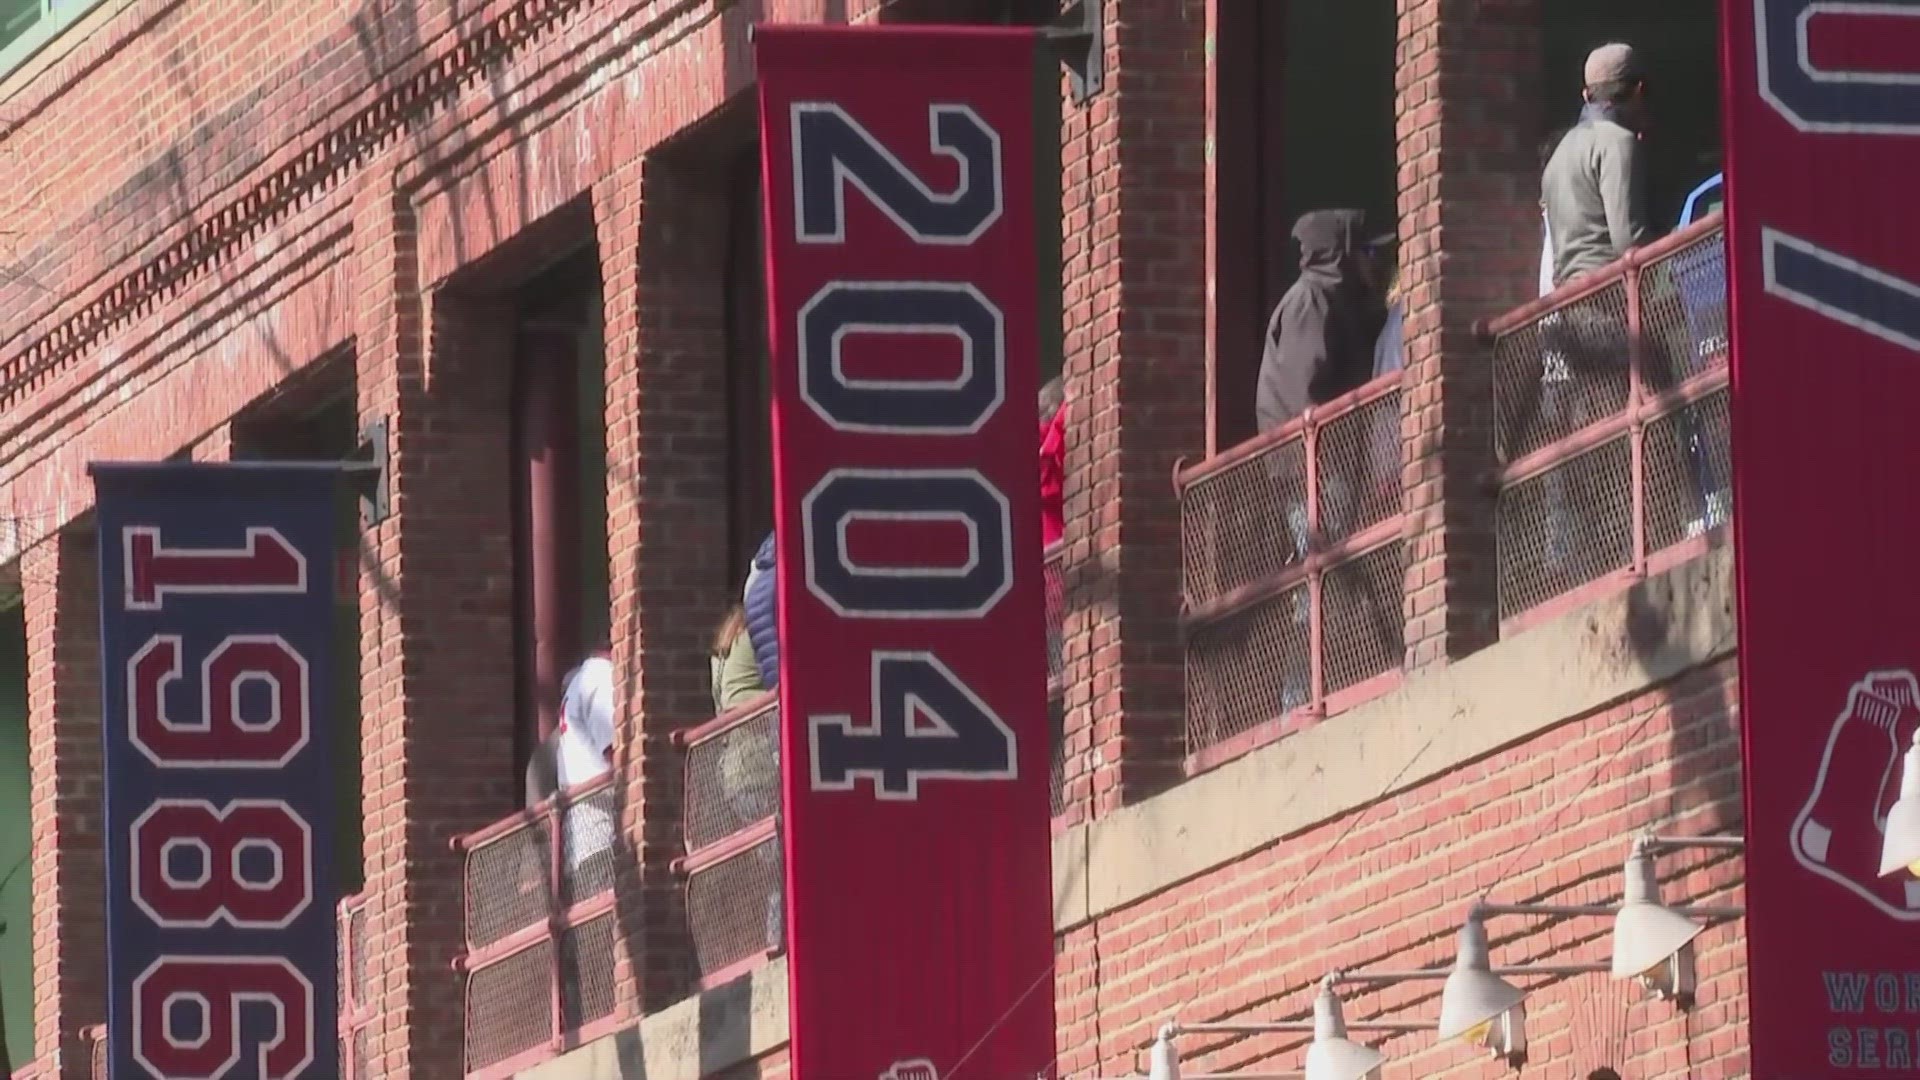 The pageantry of Fenway Park was on full display as the Red Sox held their opening day ceremony, celebrating historic wins and commemorating tragic losses.